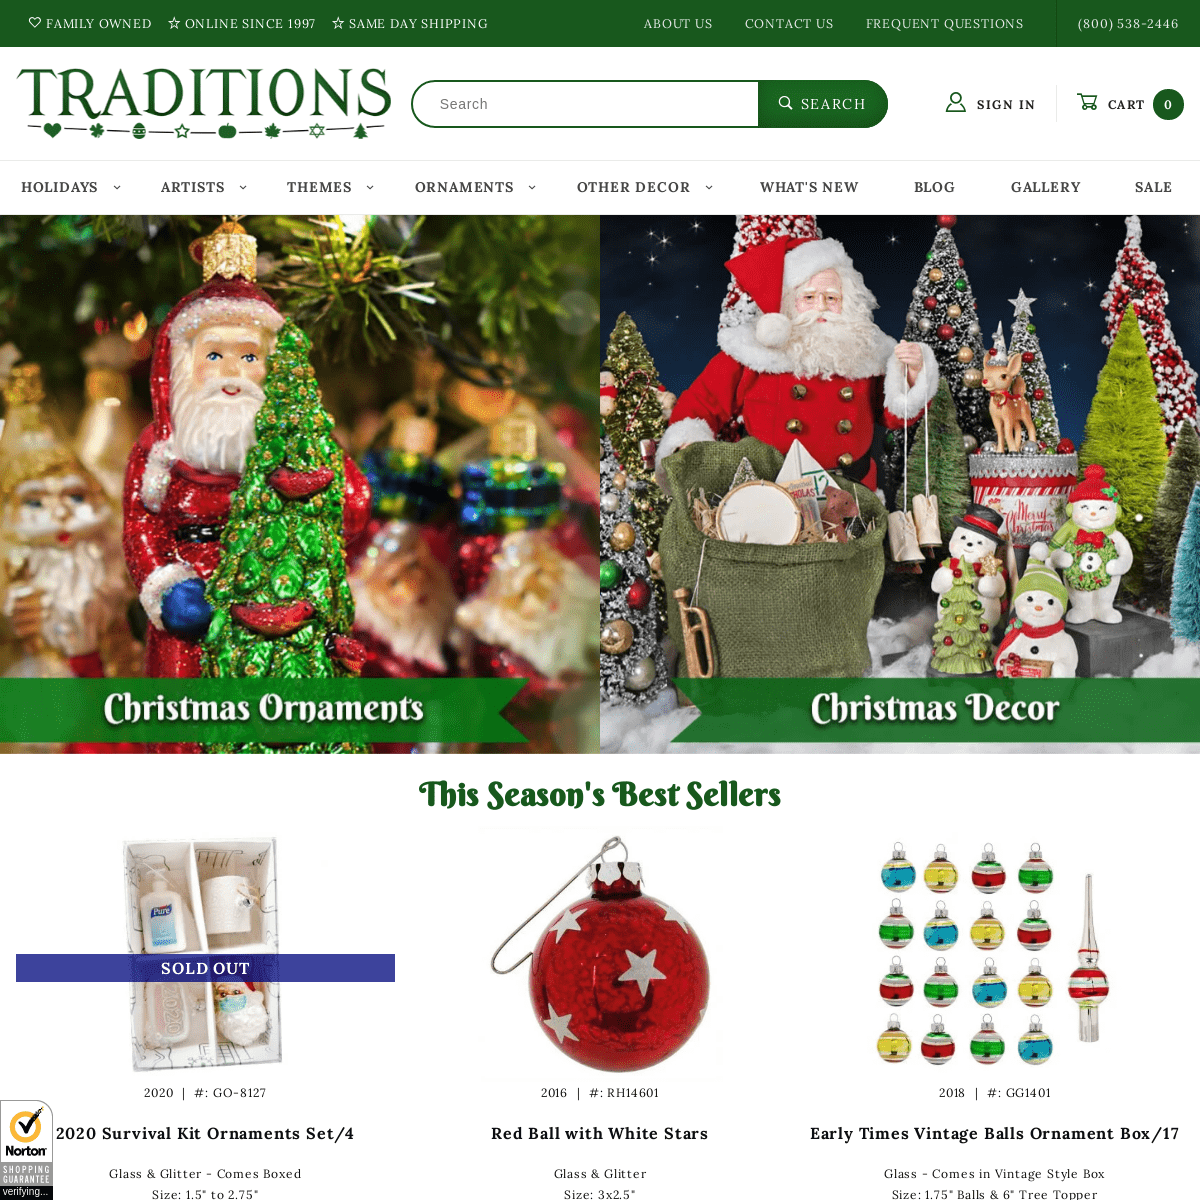 A complete backup of christmastraditions.com